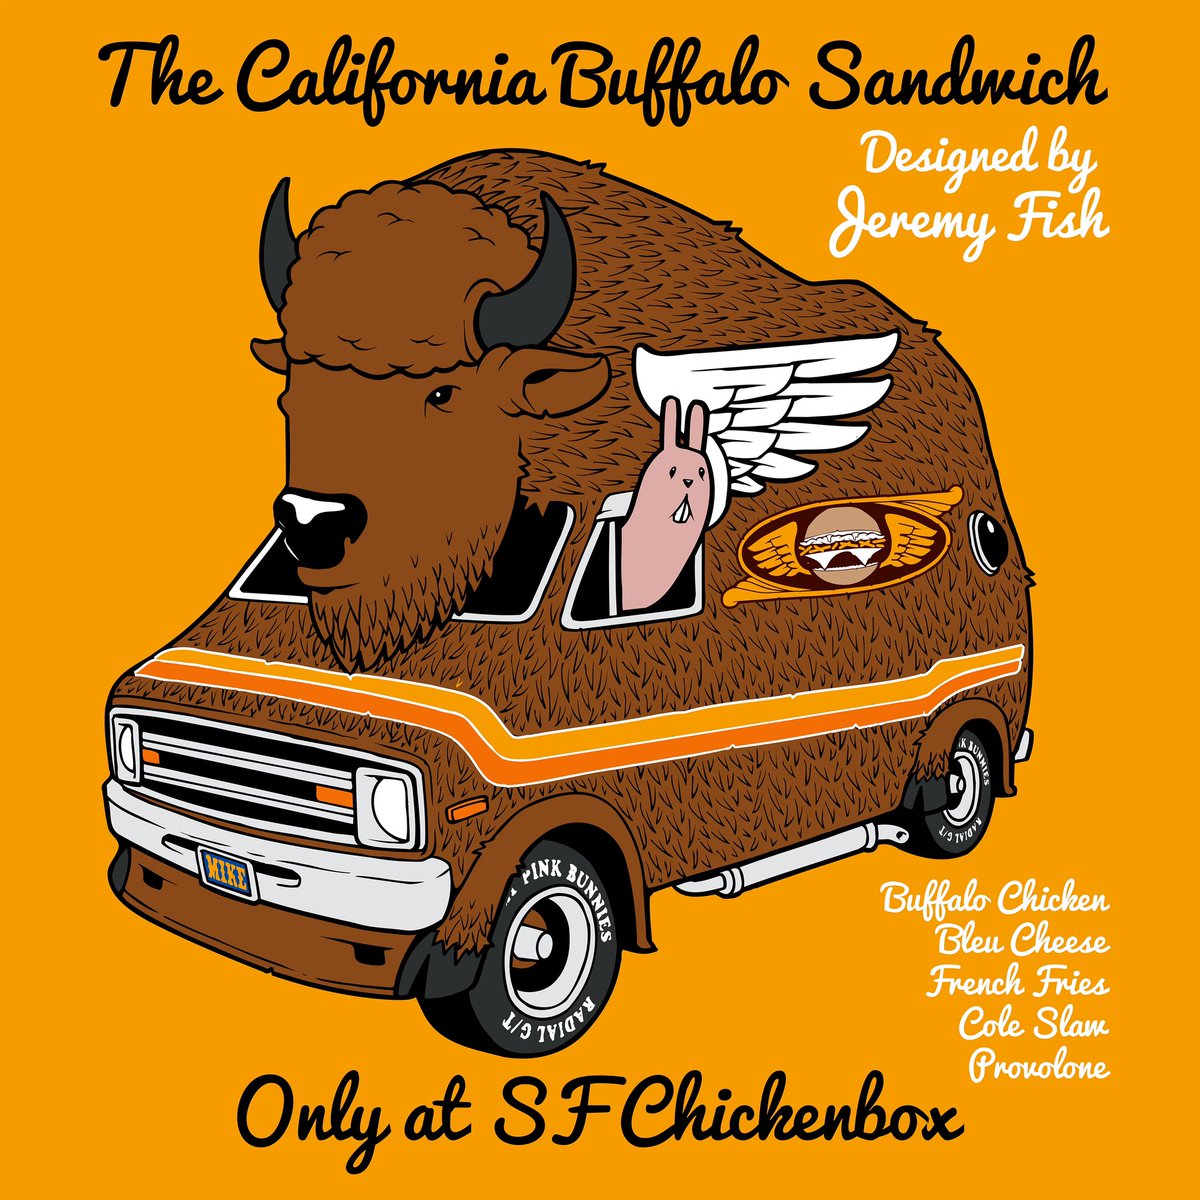 NEW SANDWICH ALERT! 
“The California Buffalo” is a collaboration with our friend @JeremyFish! Spicy Buffalo Chicken, Bleu Cheese Dressing, French Fries, Coleslaw & Provolone on a Soft Bun! Available ONLY at our shop, 464 Broadway in North Beach! Come try one today!